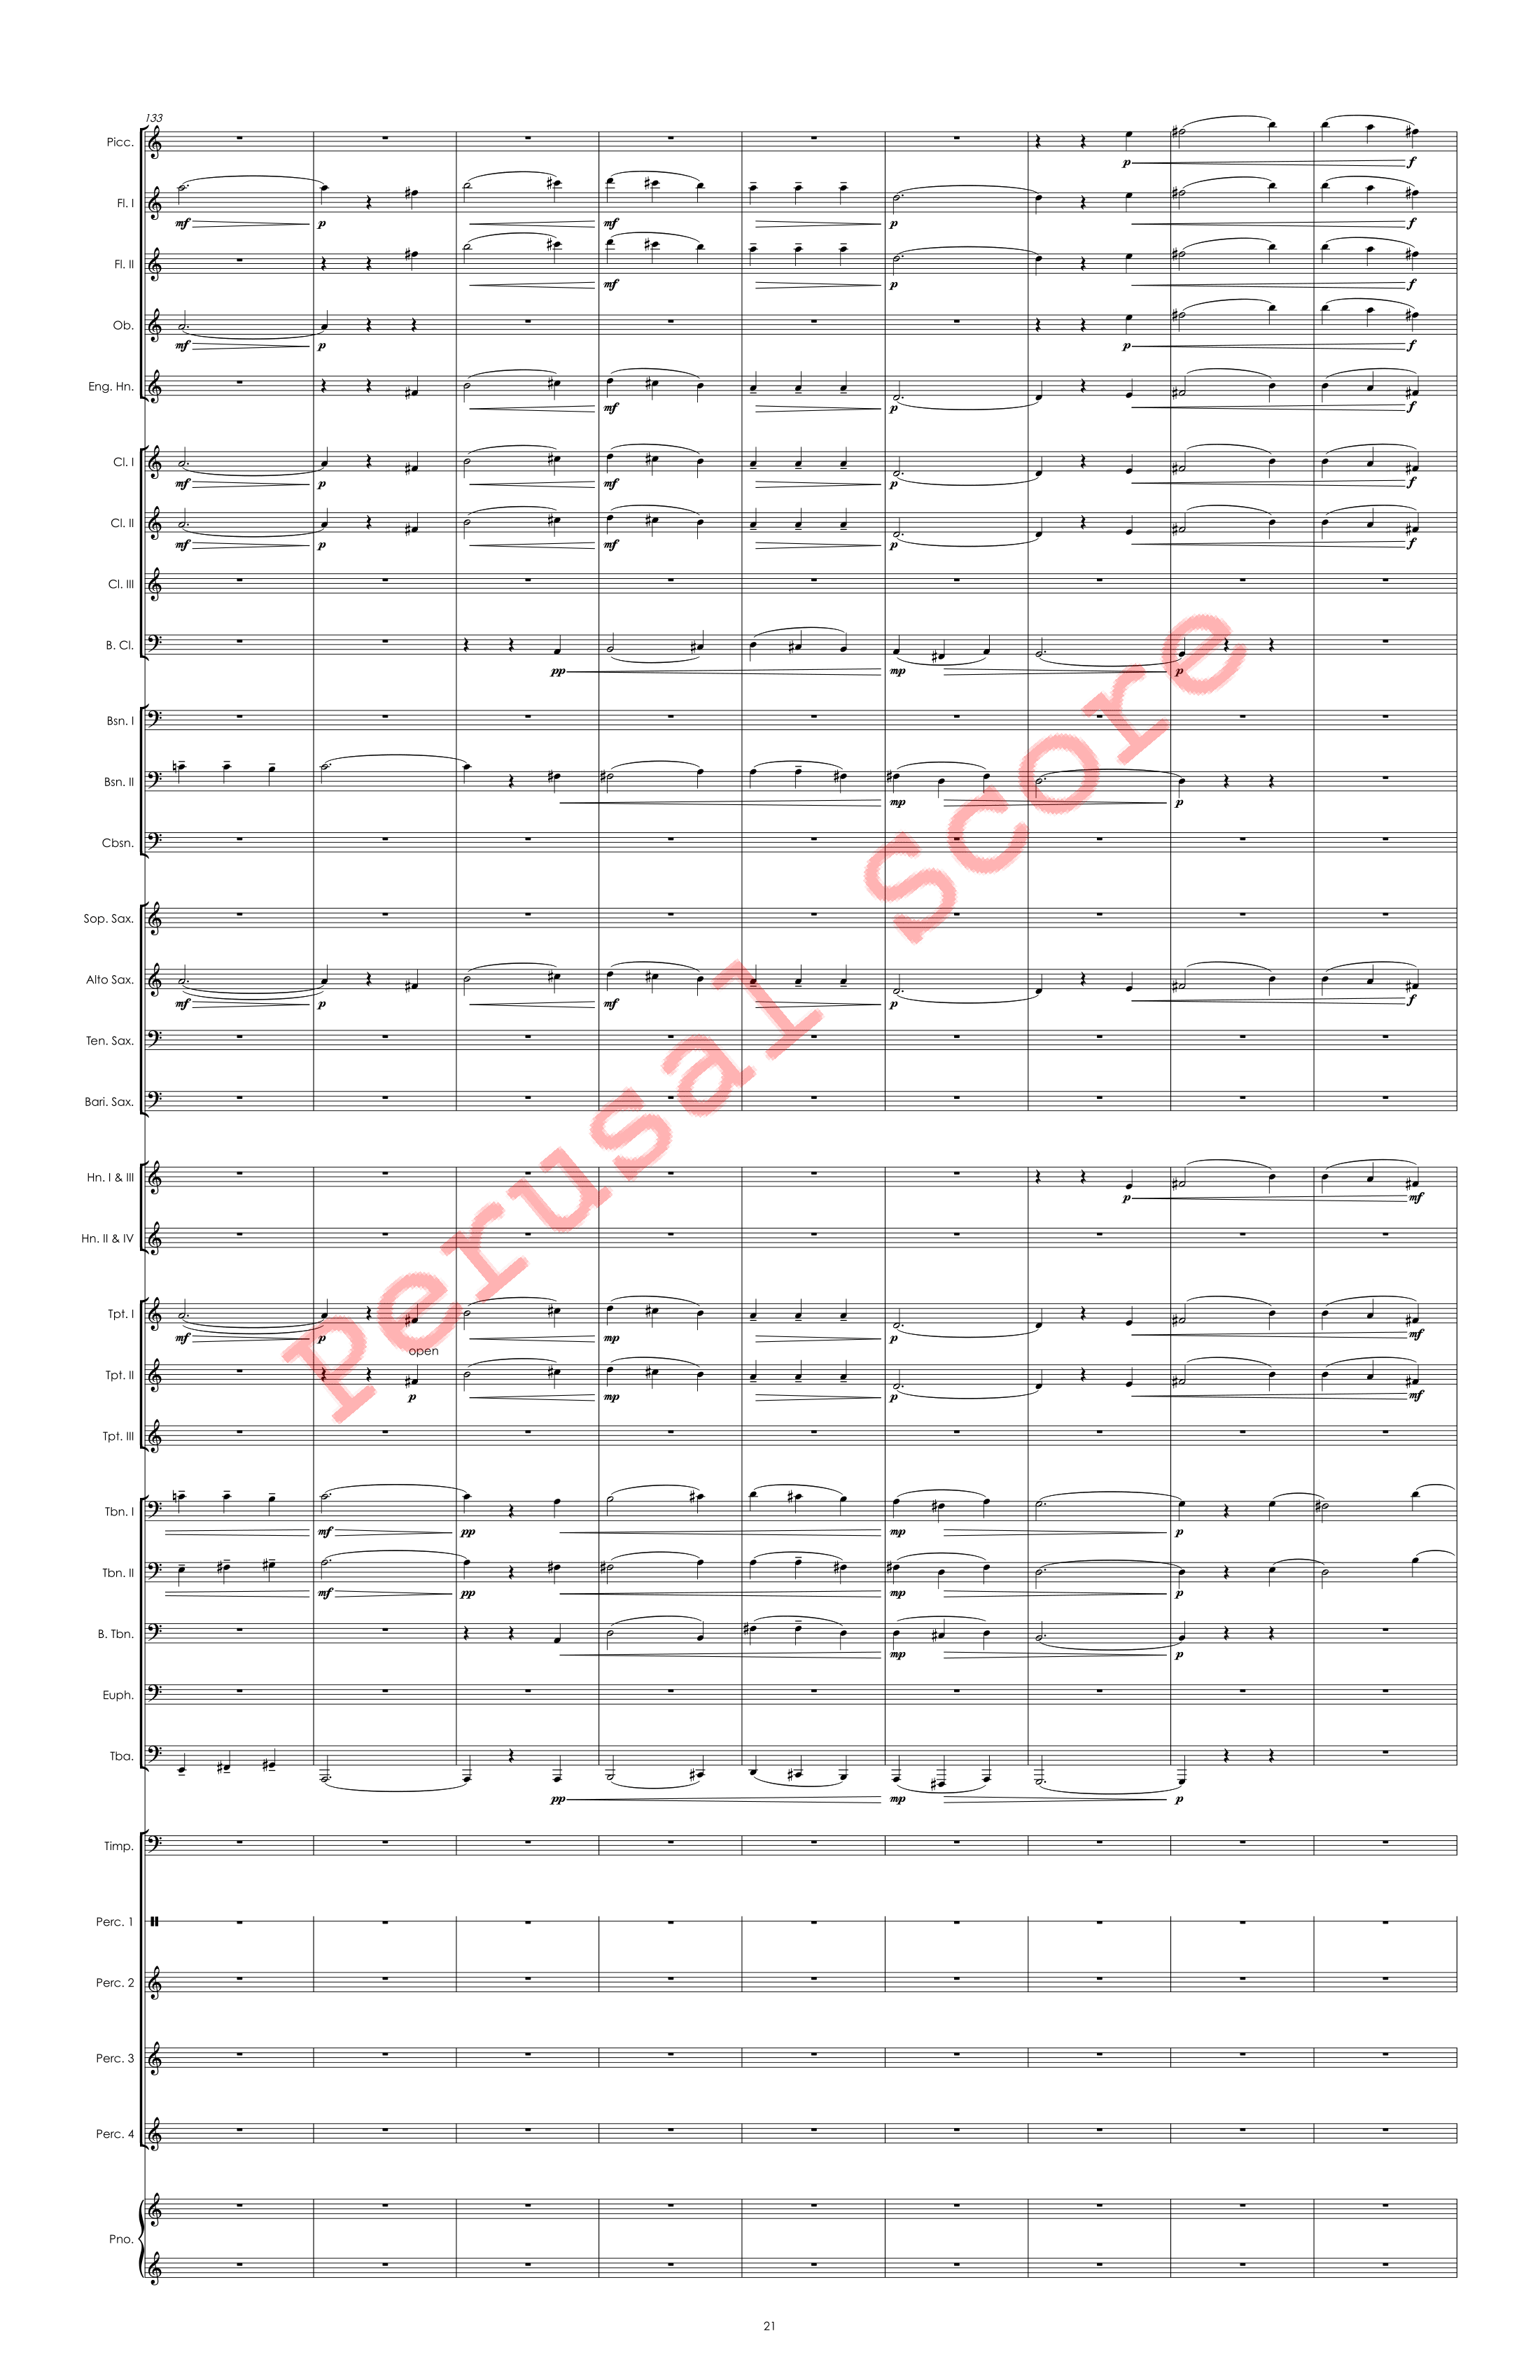 Canadian Folk Song - FINISHED 4.18.23- Full Score perusal score-21.png